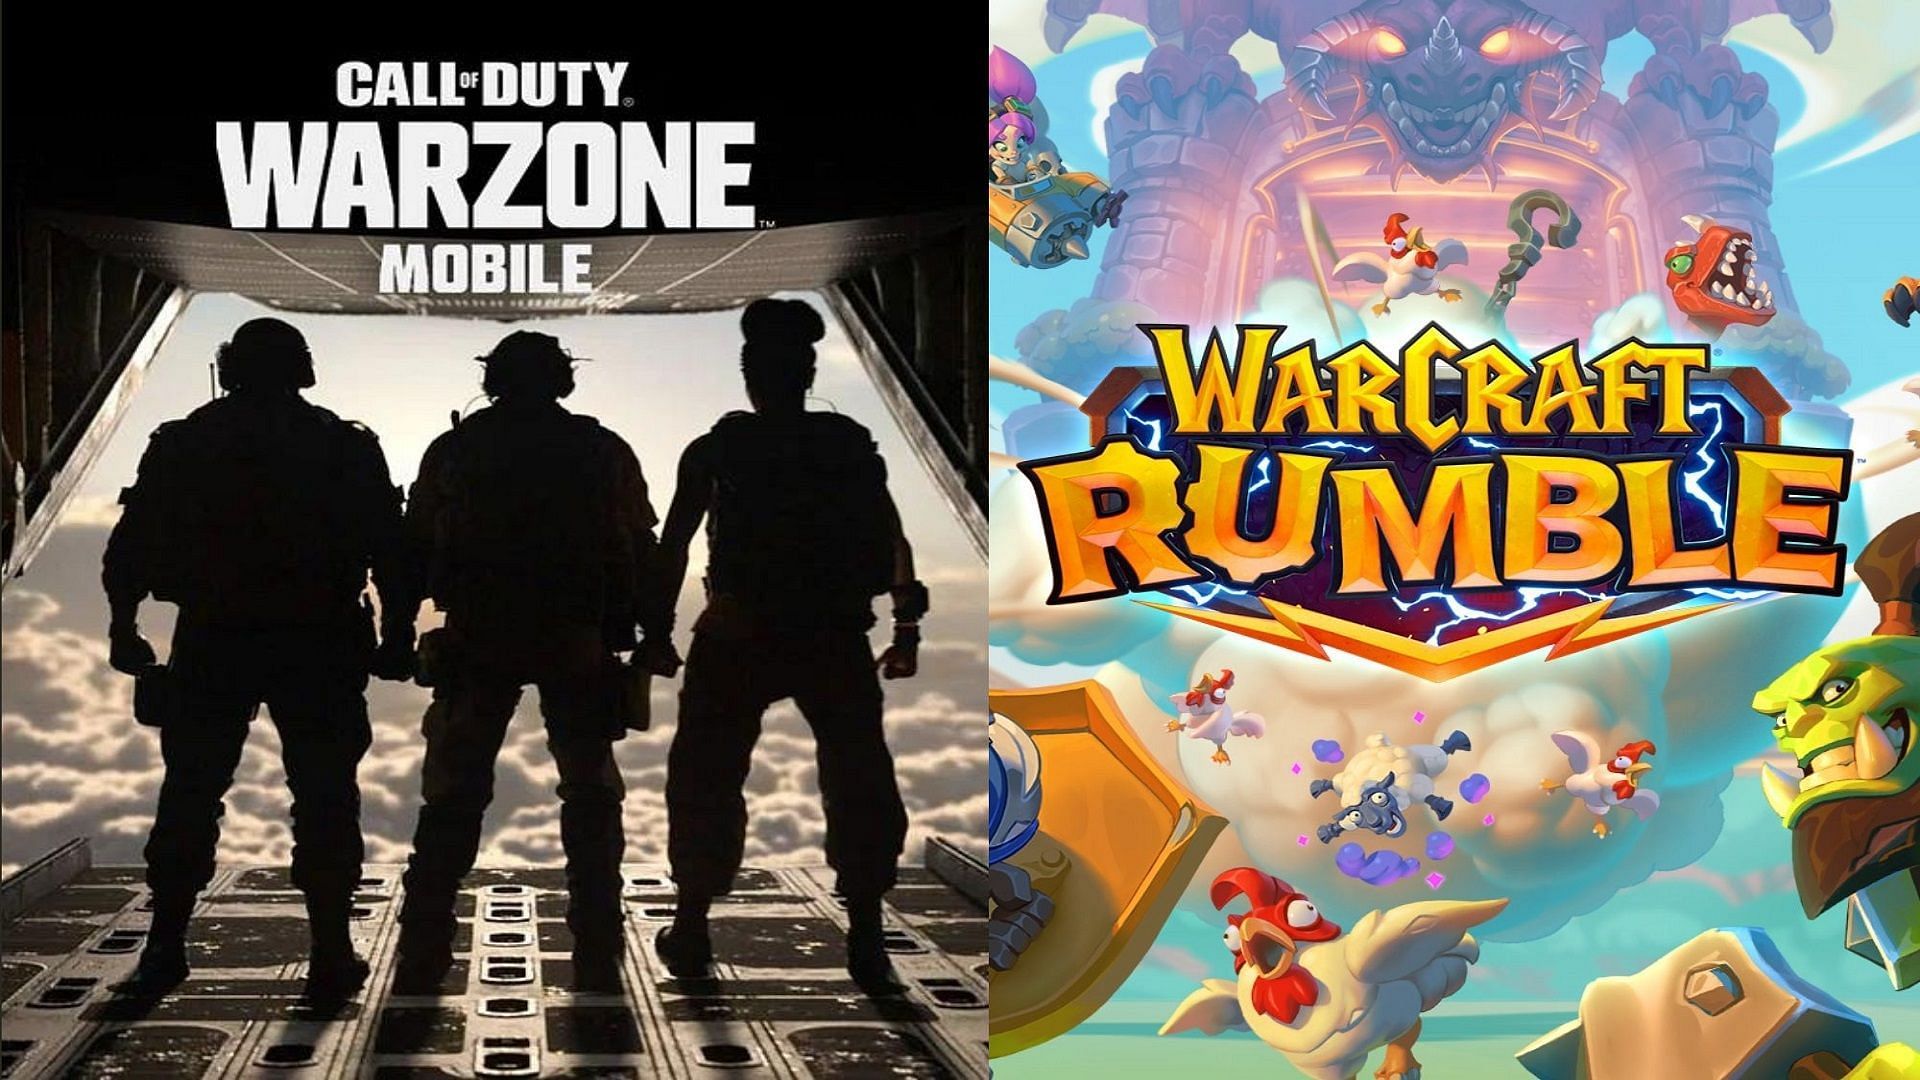 WARZONE MOBILE BETA  HOW TO DOWNLOAD AND PLAY WHEN IT COMES OUT 